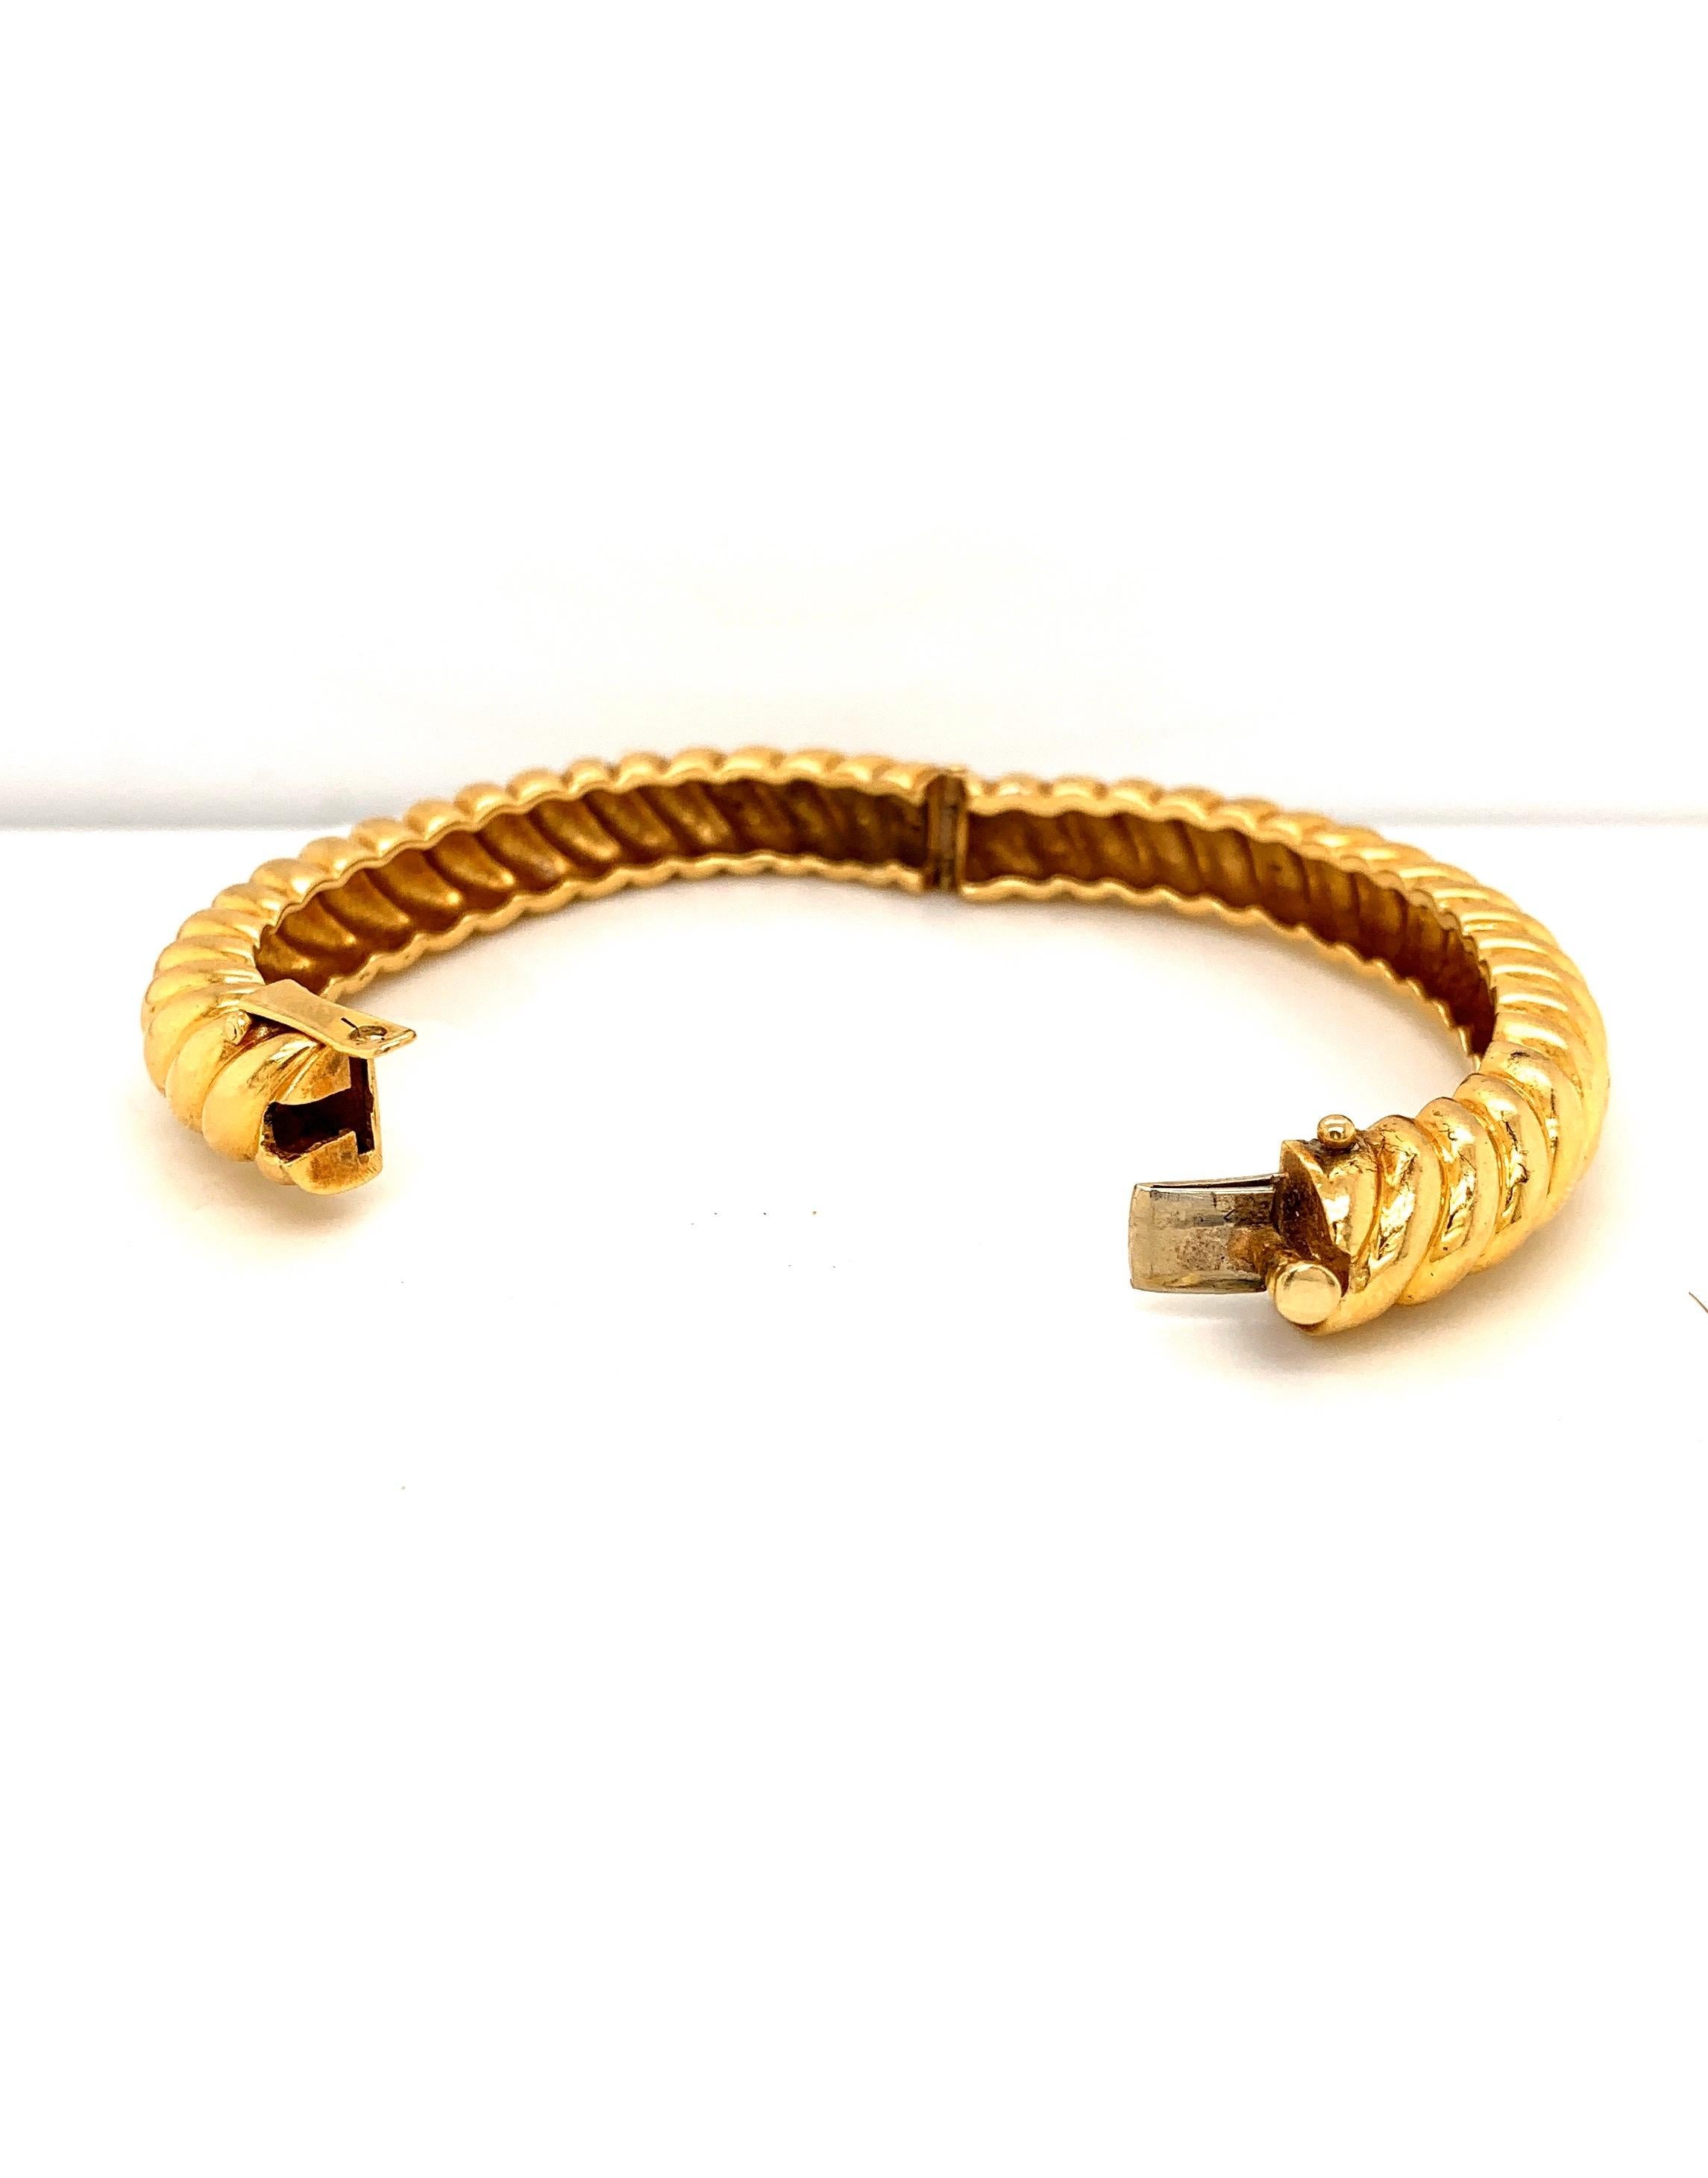 Beautiful 18k gold David Webb bracelet.
This classic bangle from the legendary house of David Webb is simple yet elegant. True to the Webb style classic, beautiful jewelry that can be worn for any occasion.